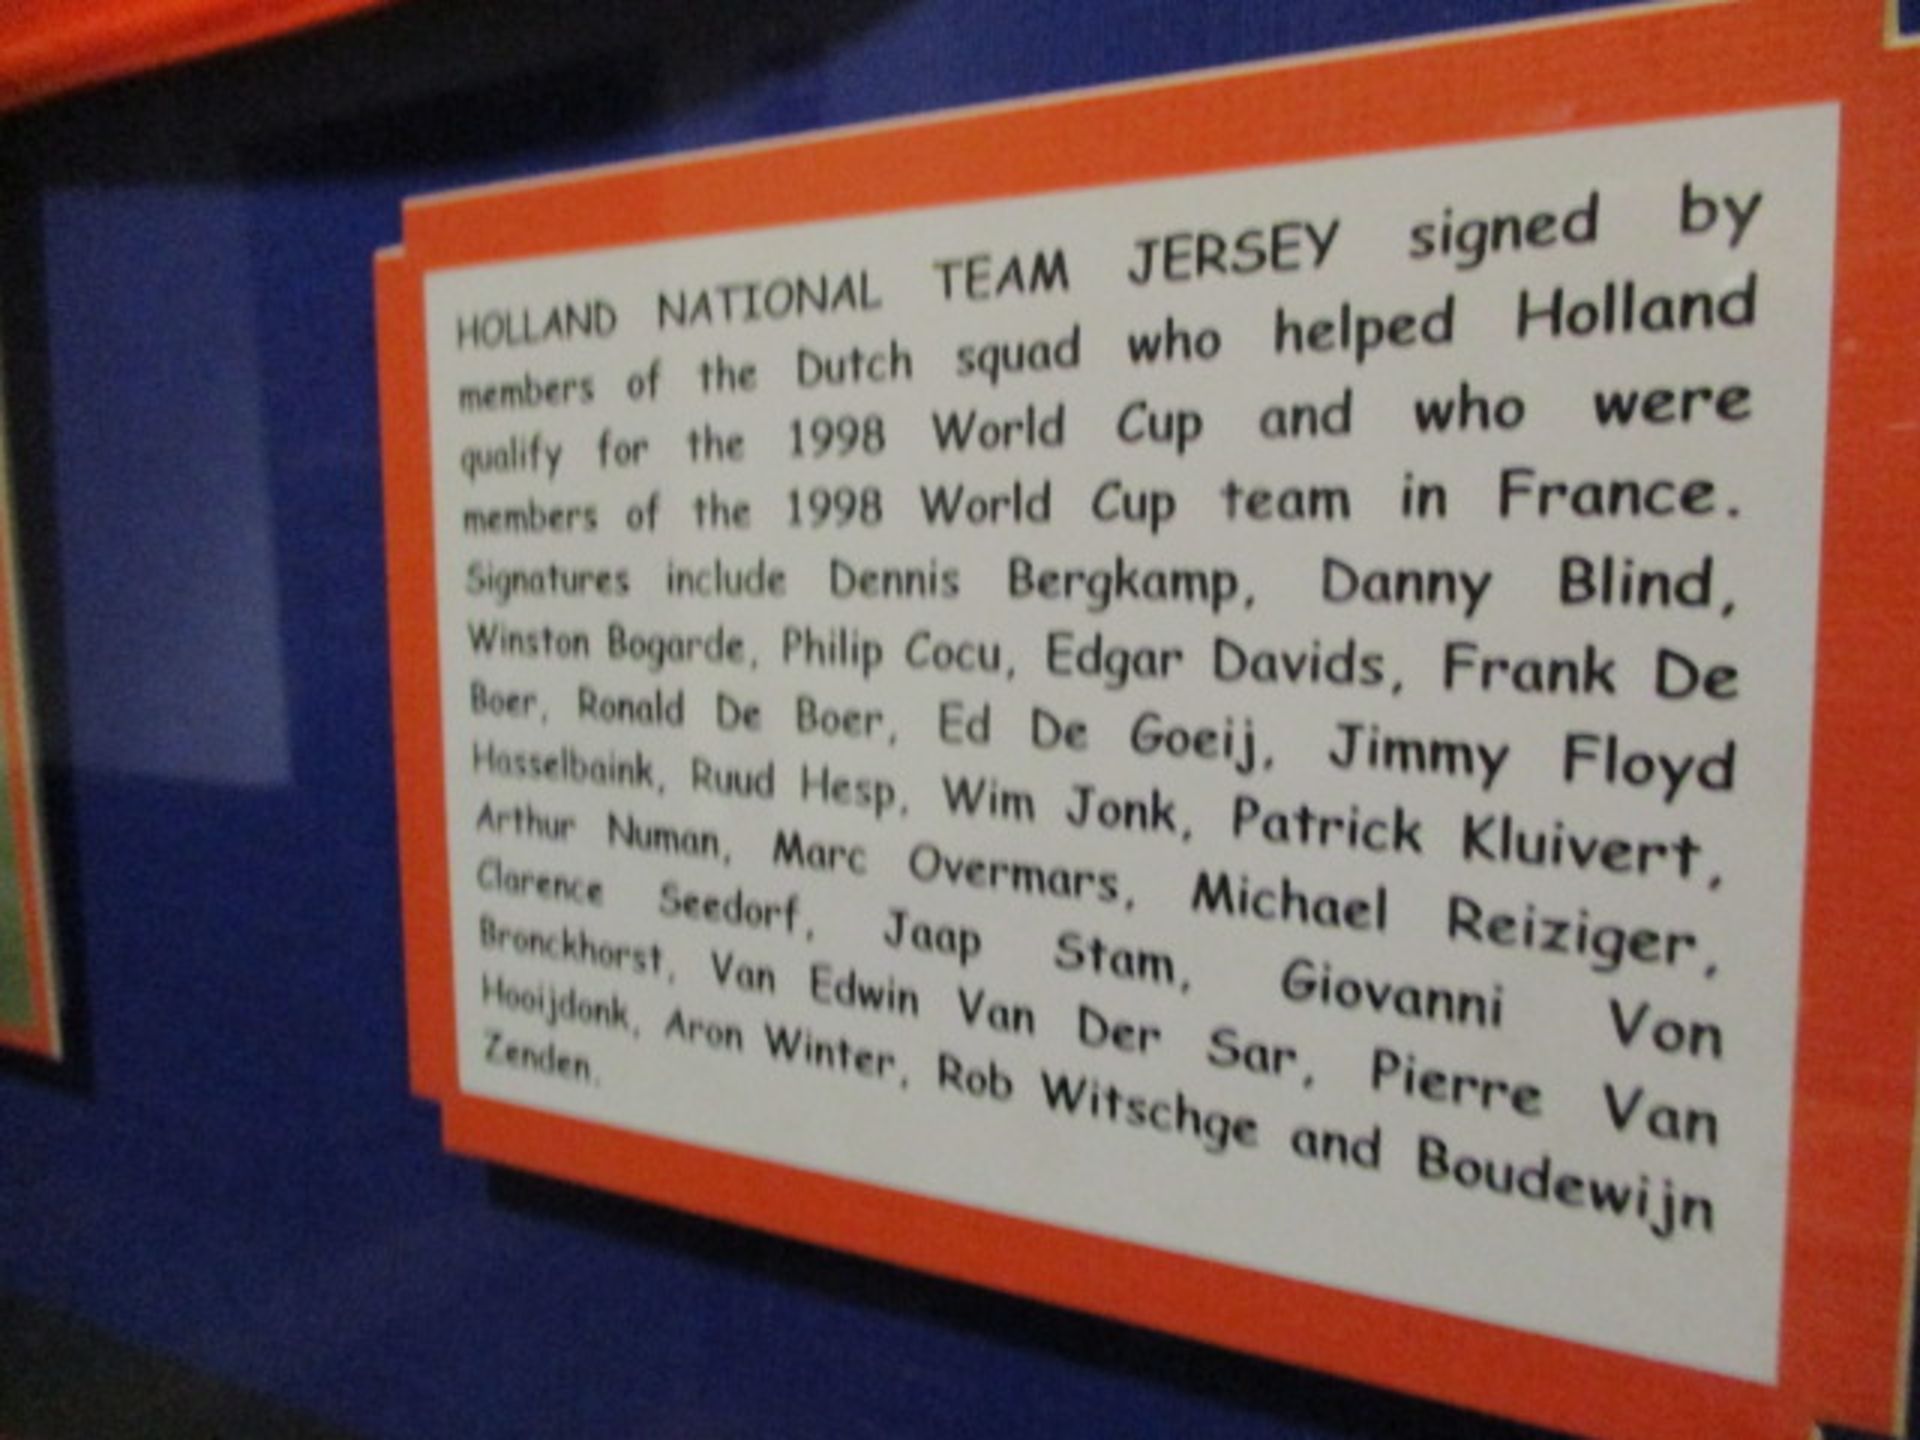 Holland National Team jersey - 1998 World Cup in France, 63-1/2in w x 46-1/2in hgt - Image 3 of 3